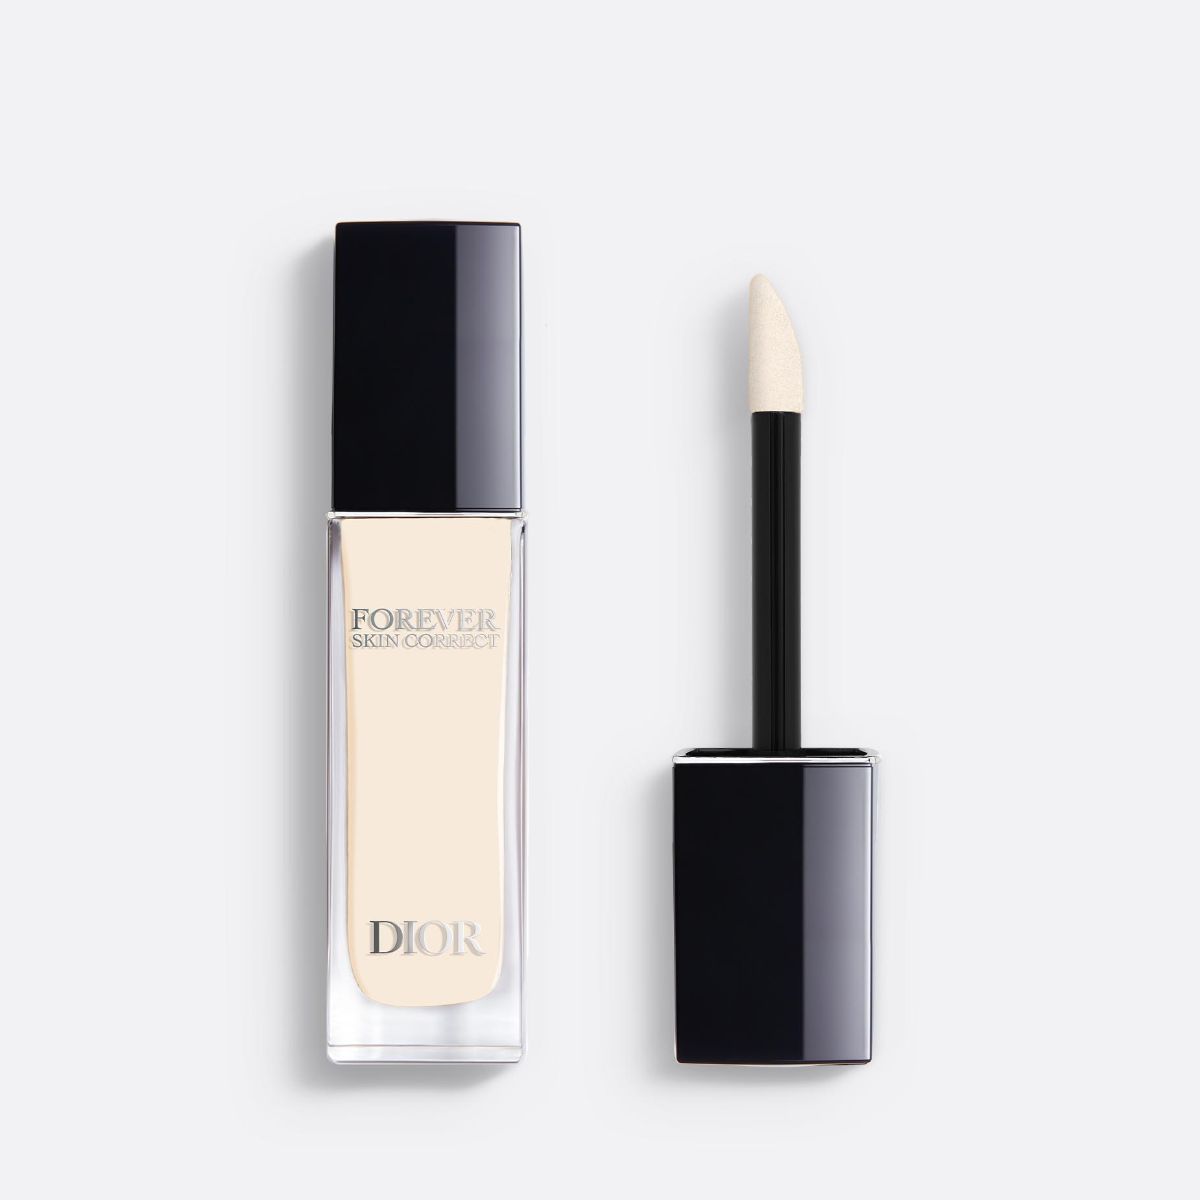 DIOR FOREVER SKIN CORRECT ~ Full-Coverage Concealer - 24h Hydration and Wear - No Transfer